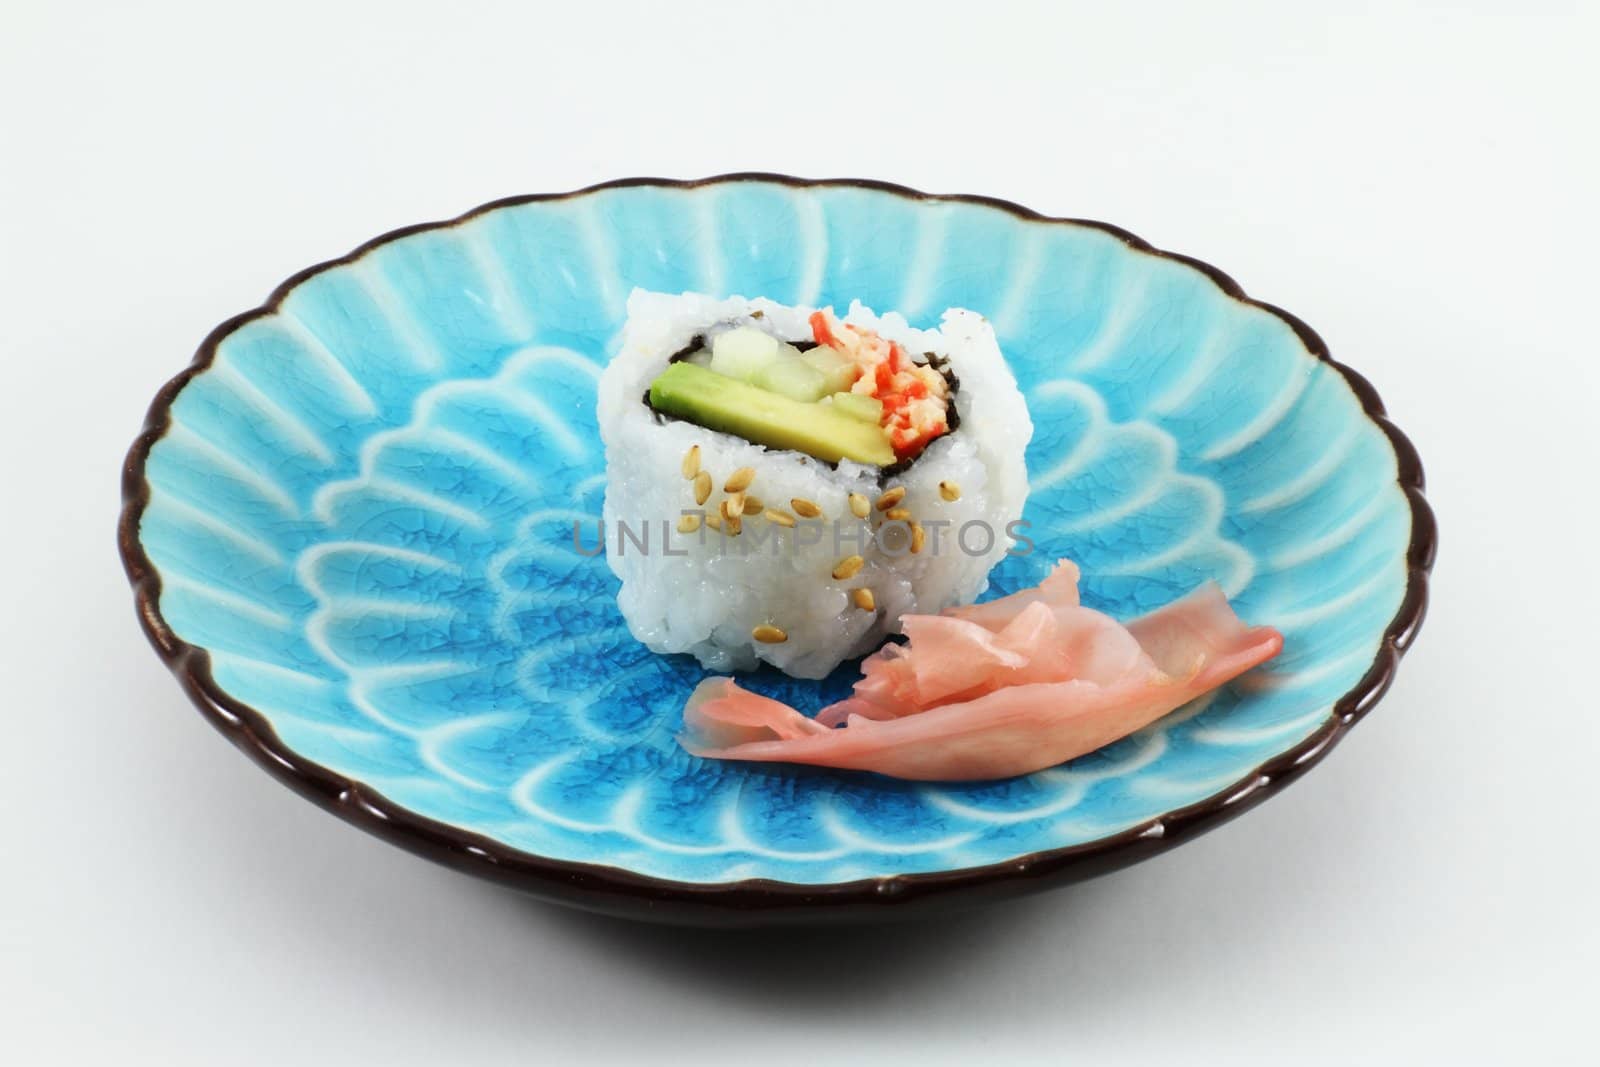 Sushi and ginger root on a blue dish.
